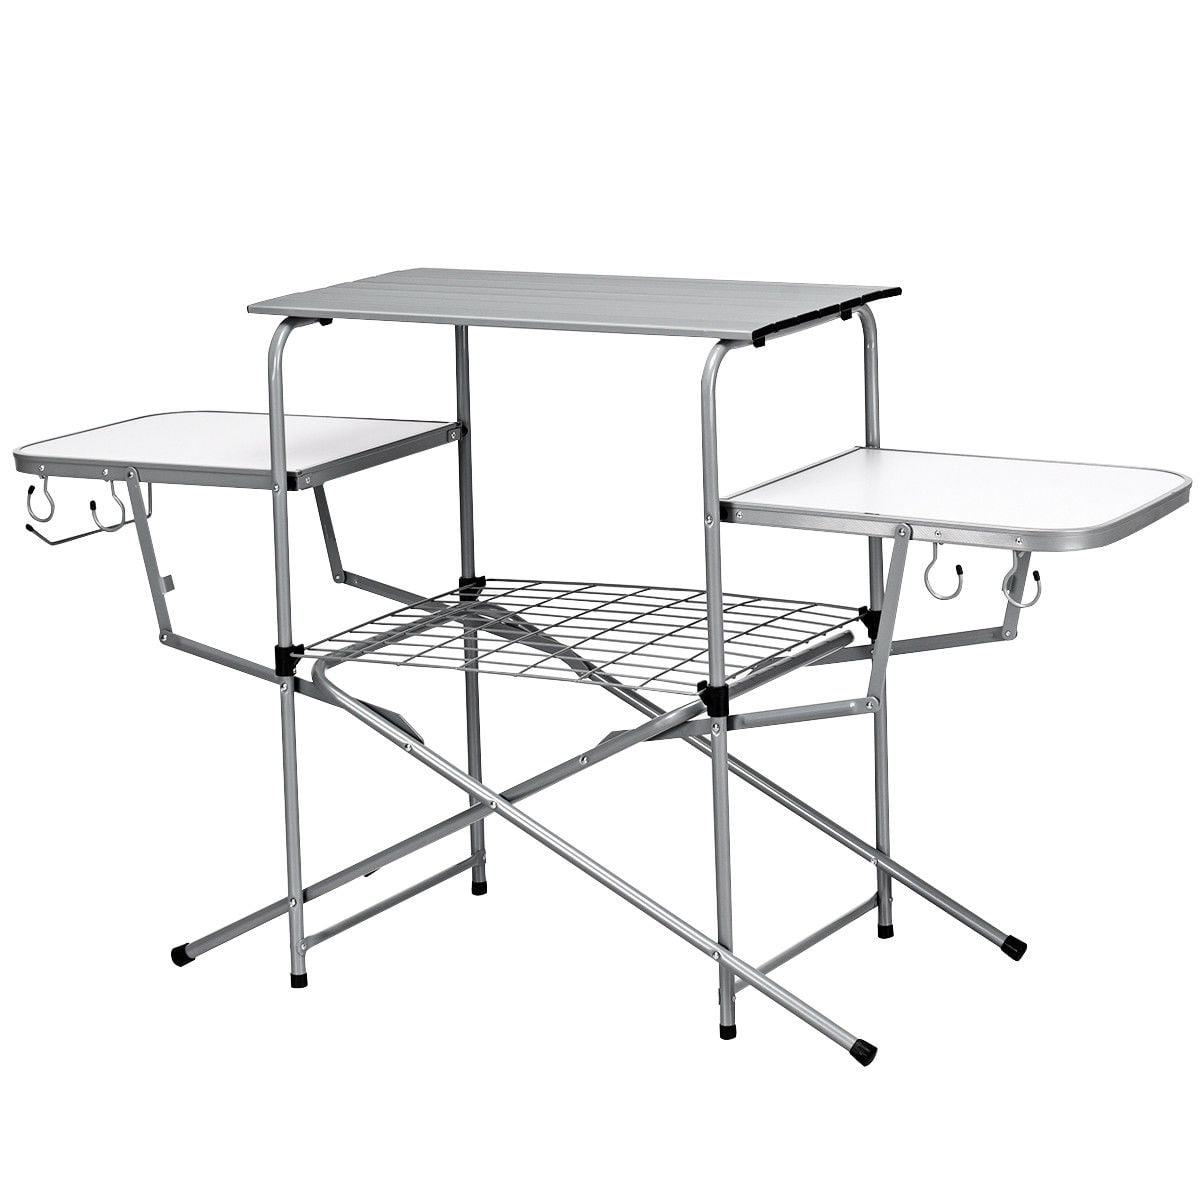 Costway Foldable Camping Table Outdoor 